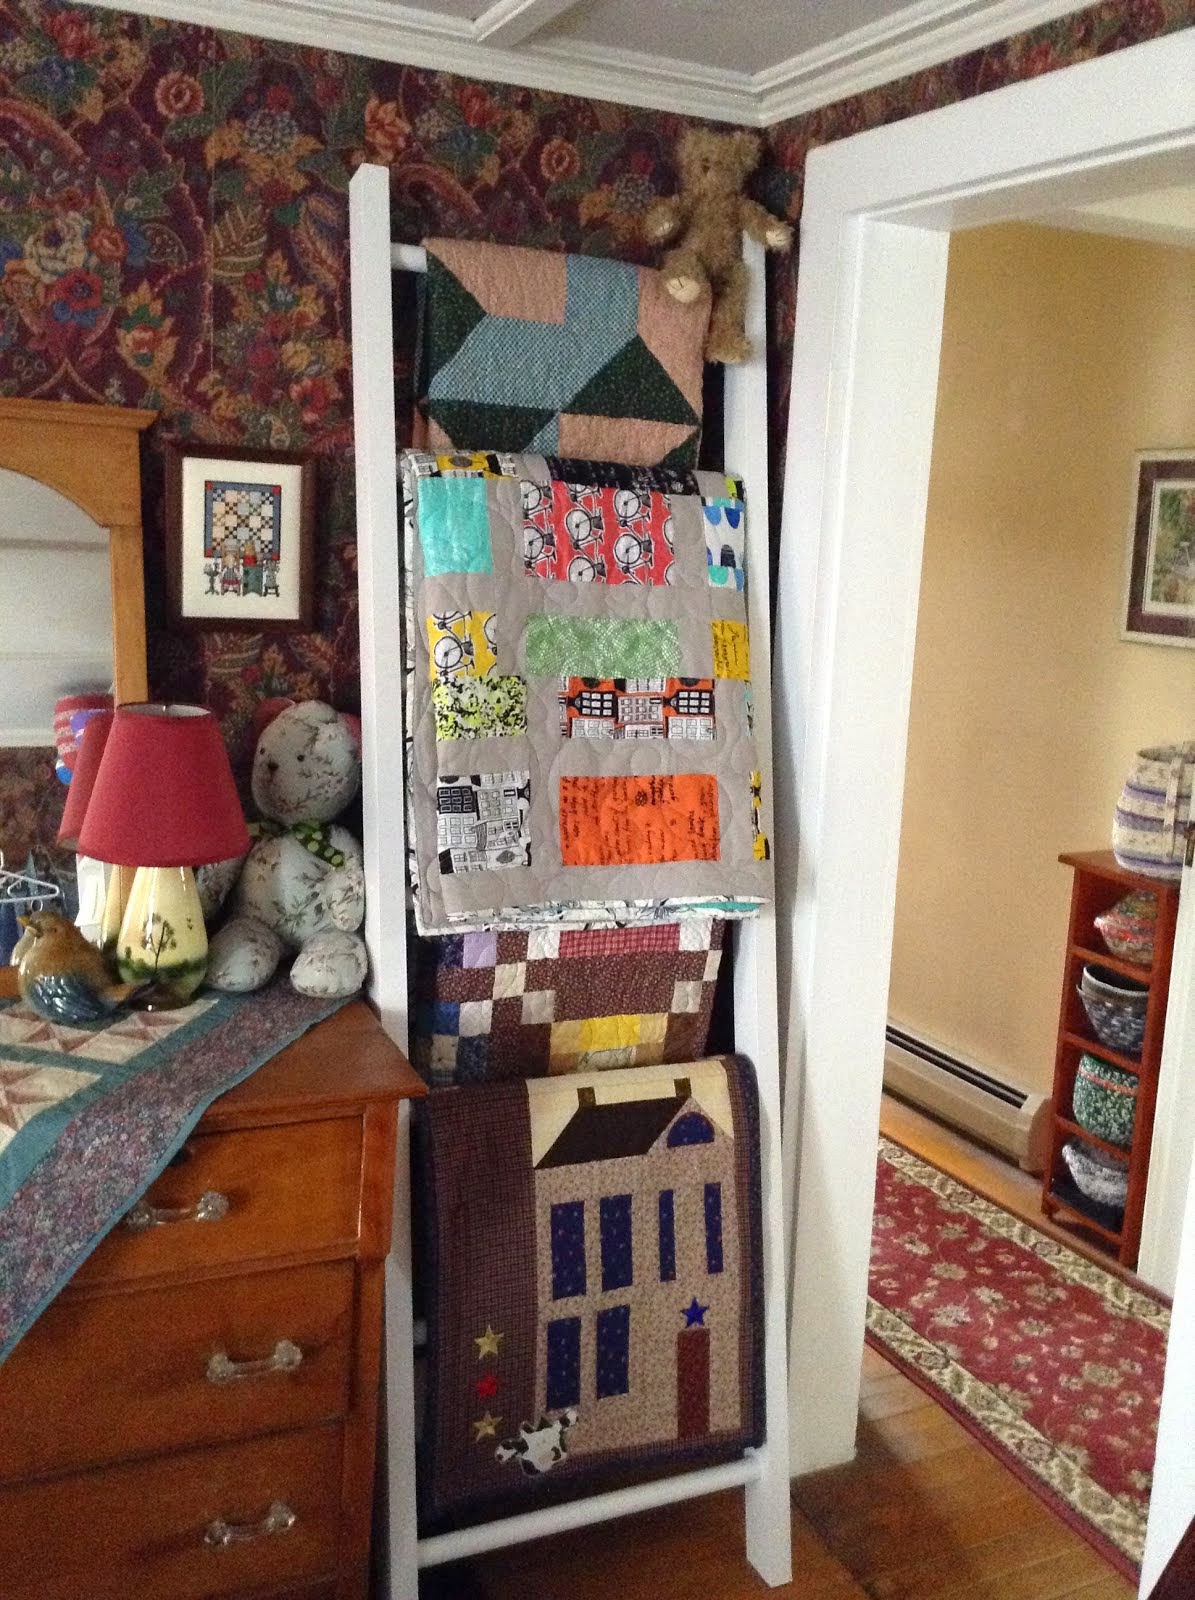 Quilt Ladder(so many quilts, had to climb wall!)